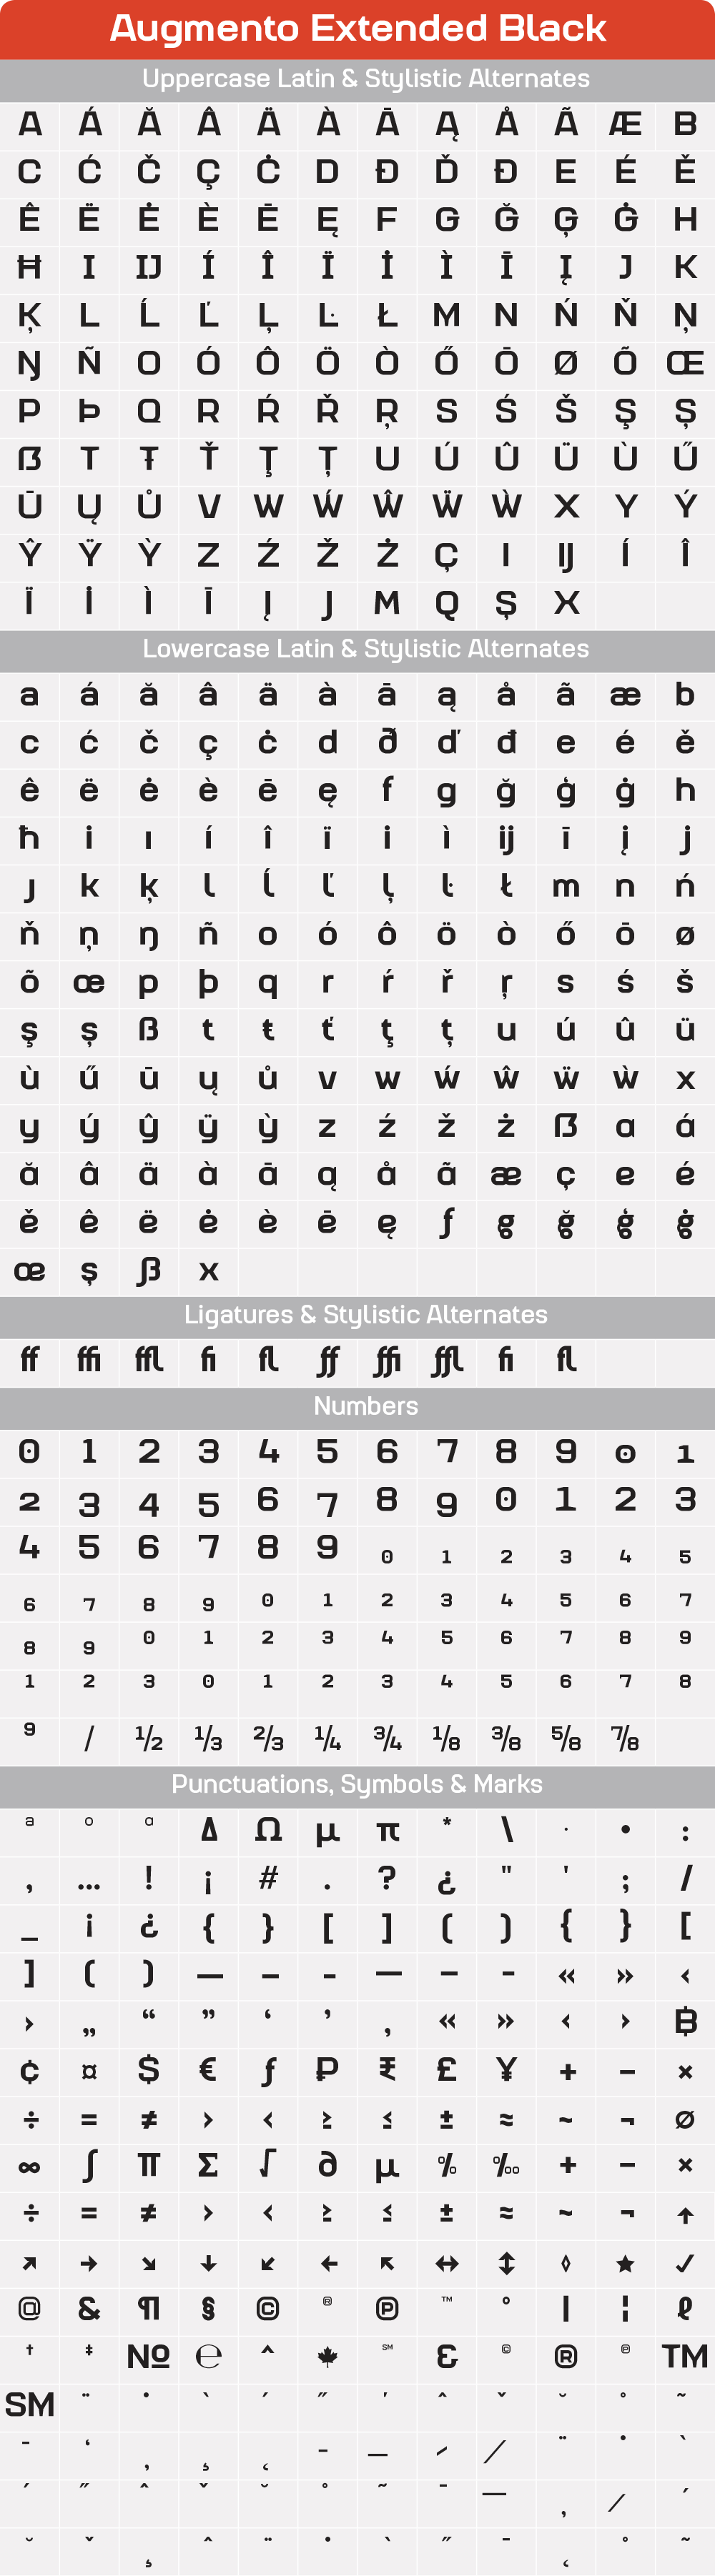 Extended BlackAugmento-GlyphTable.png